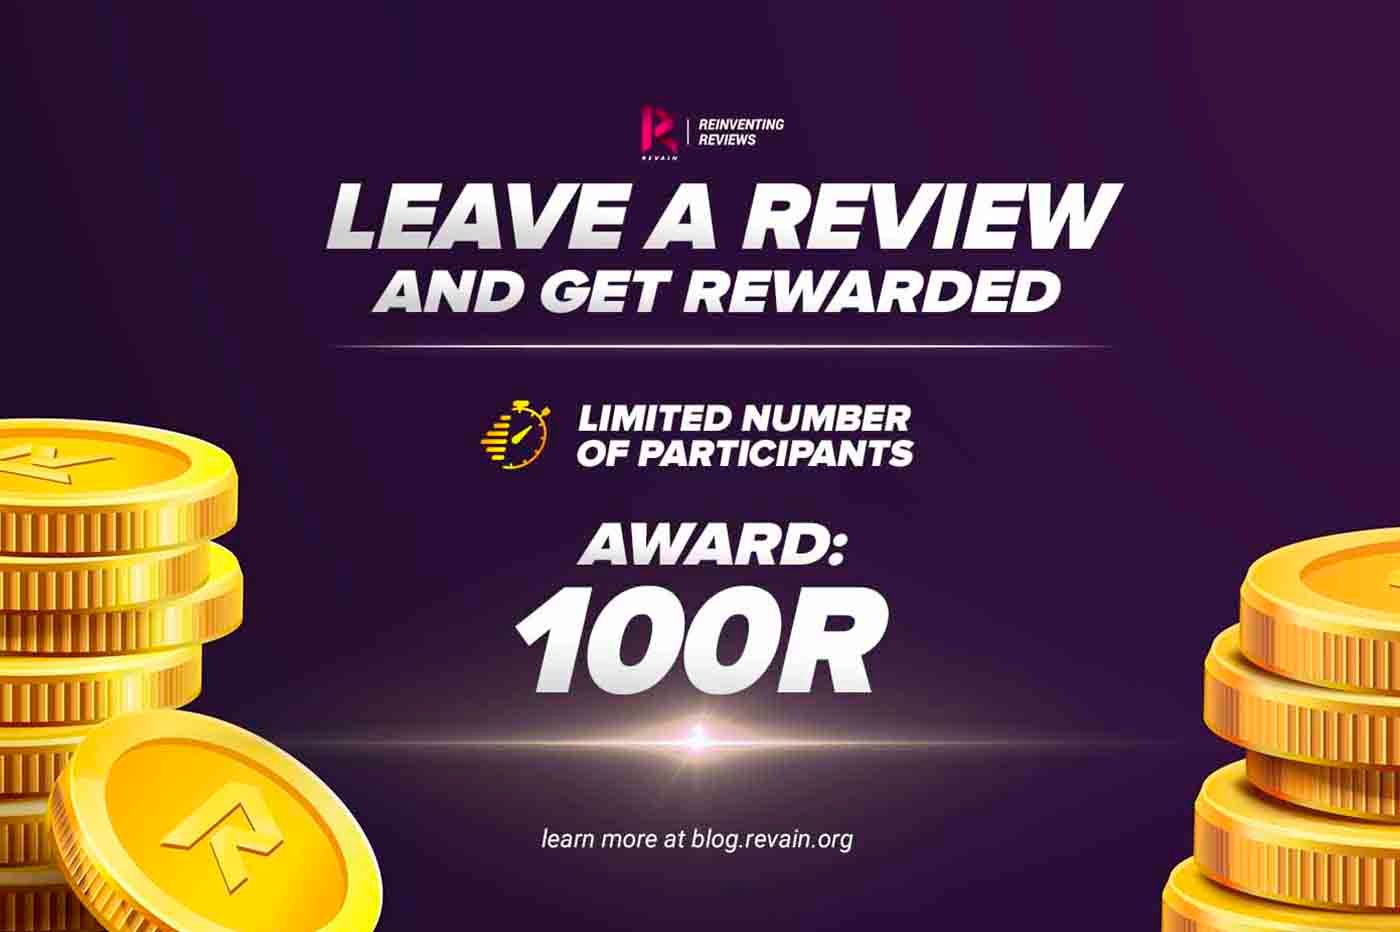 Article Revain gives away 100 R tokens for writing a review. Join!